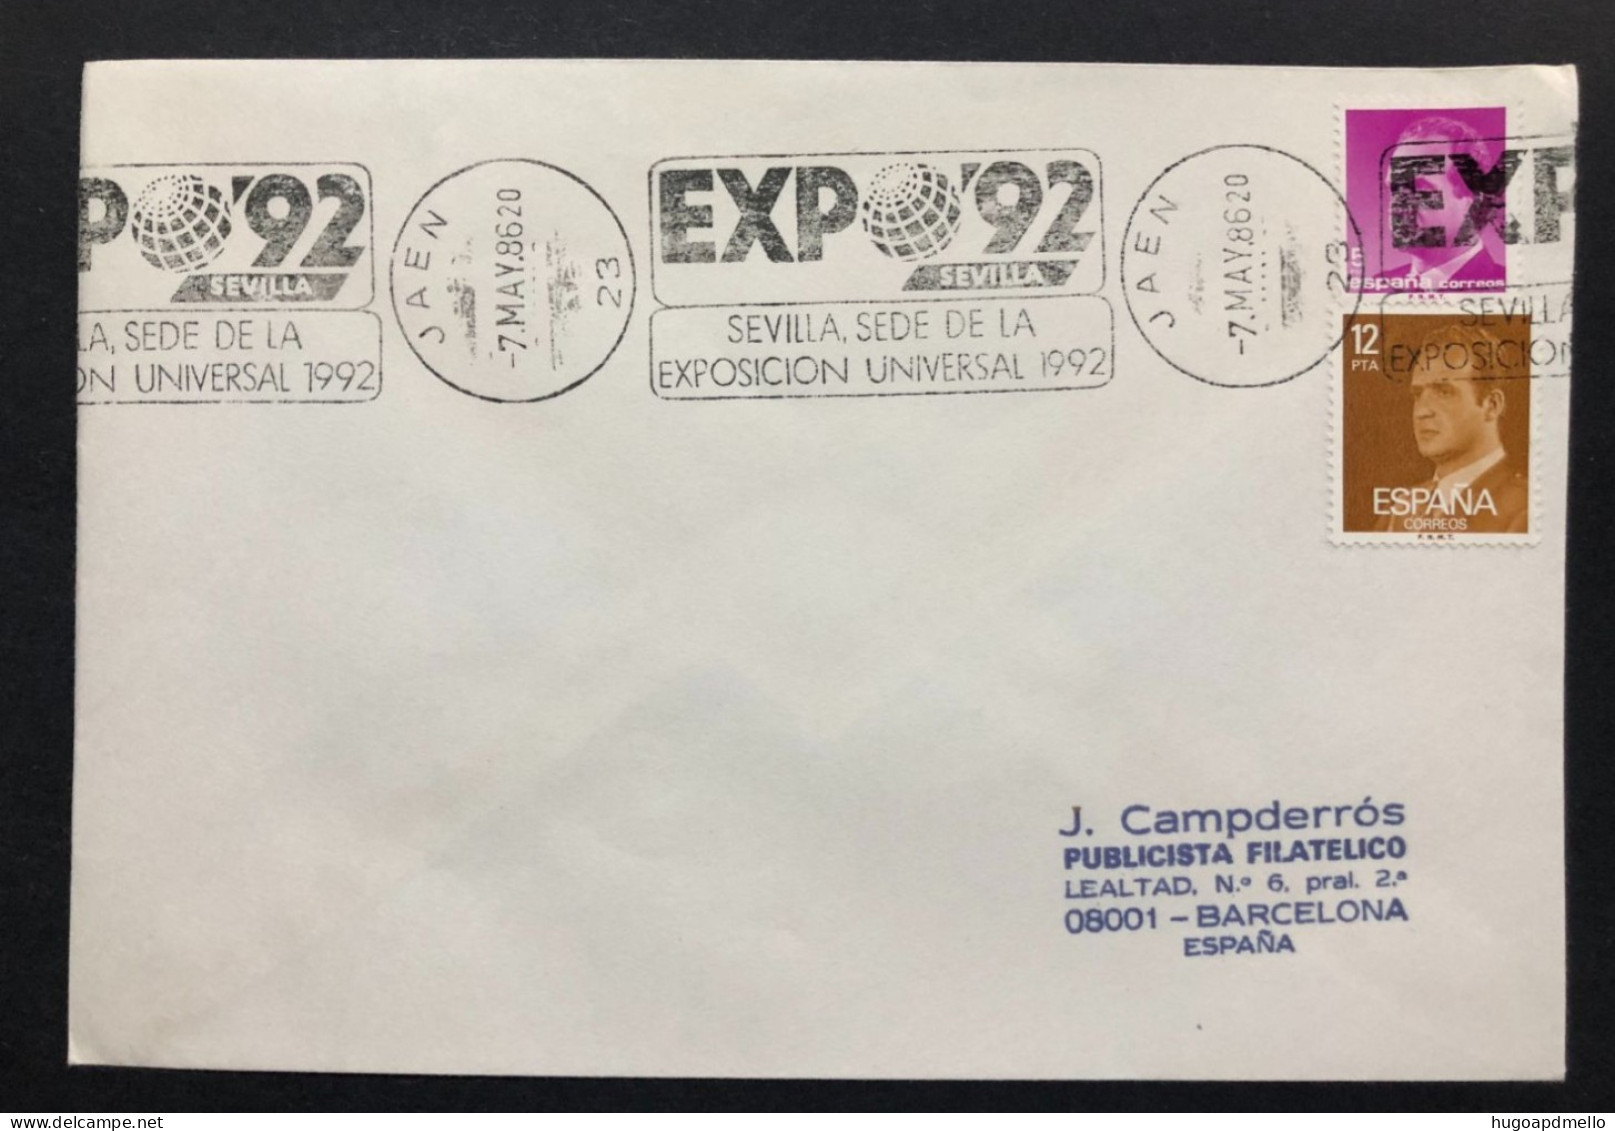 SPAIN, Cover With Special Cancellation « EXPO '92 », «JAEN Postmark », 1986 - 1992 – Séville (Espagne)